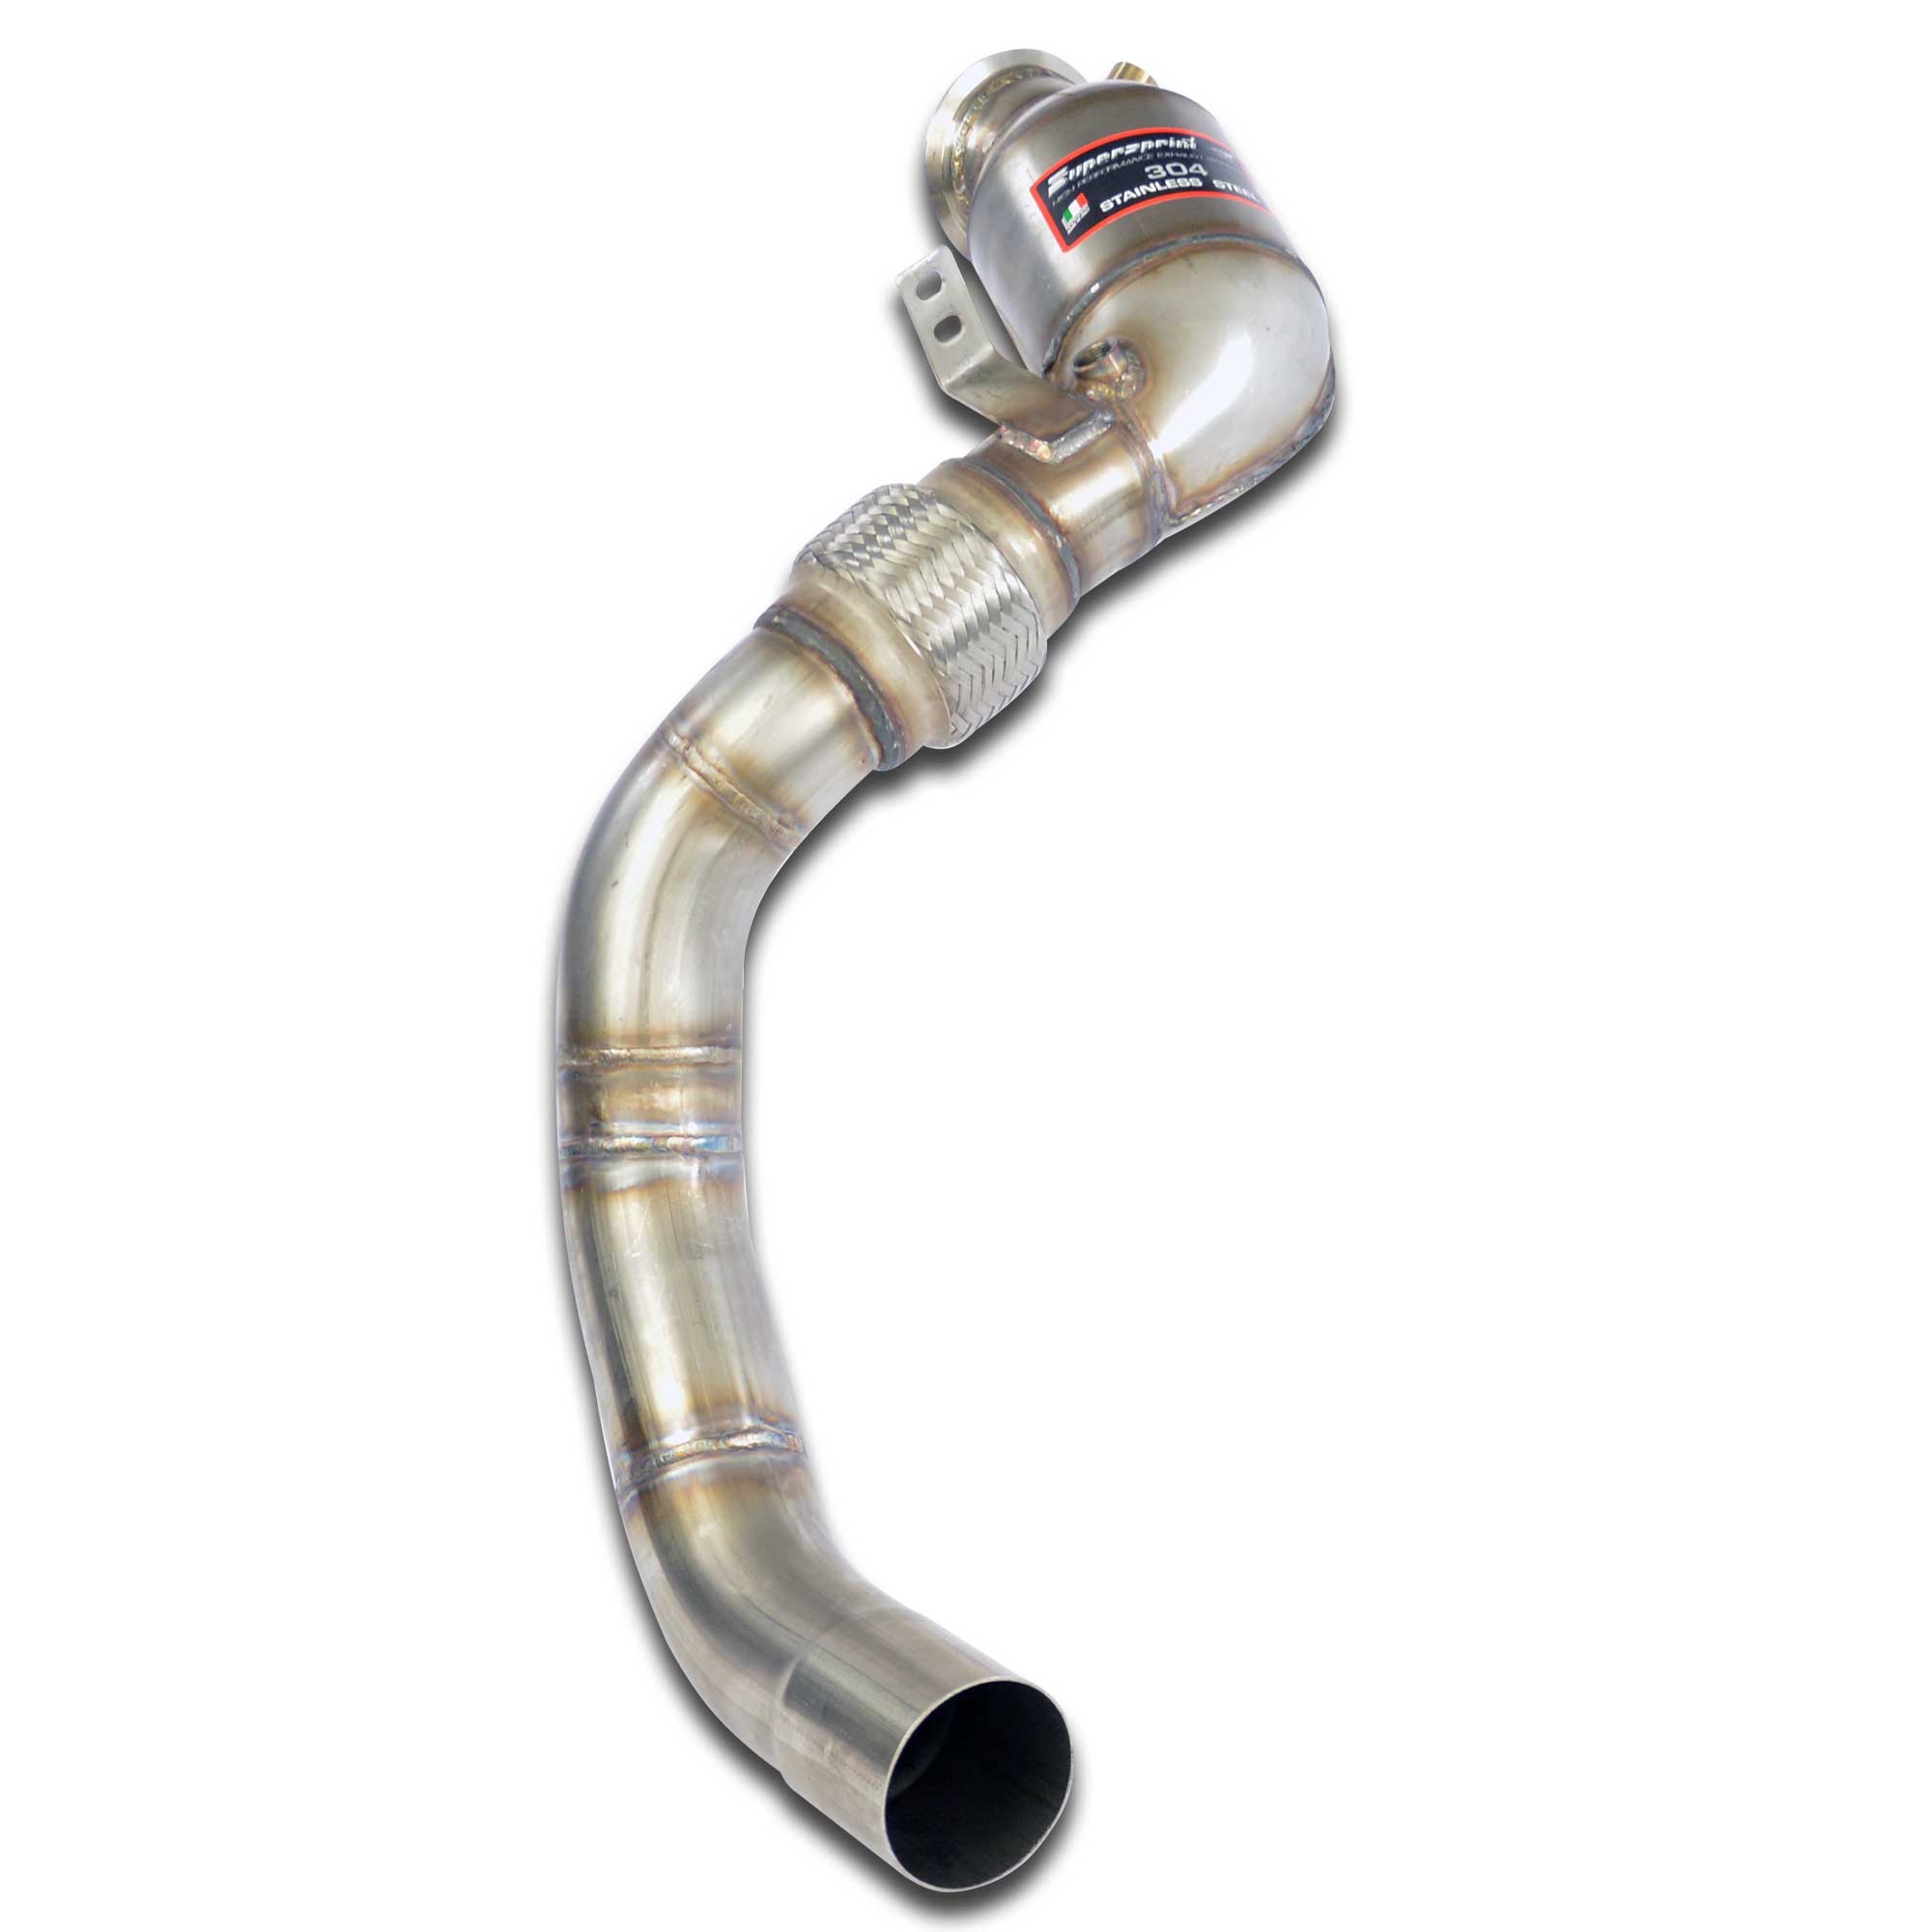 SUPERSPRINT Turbo downpipe kit + Metallic catalytic converter Left Accepts the stock 